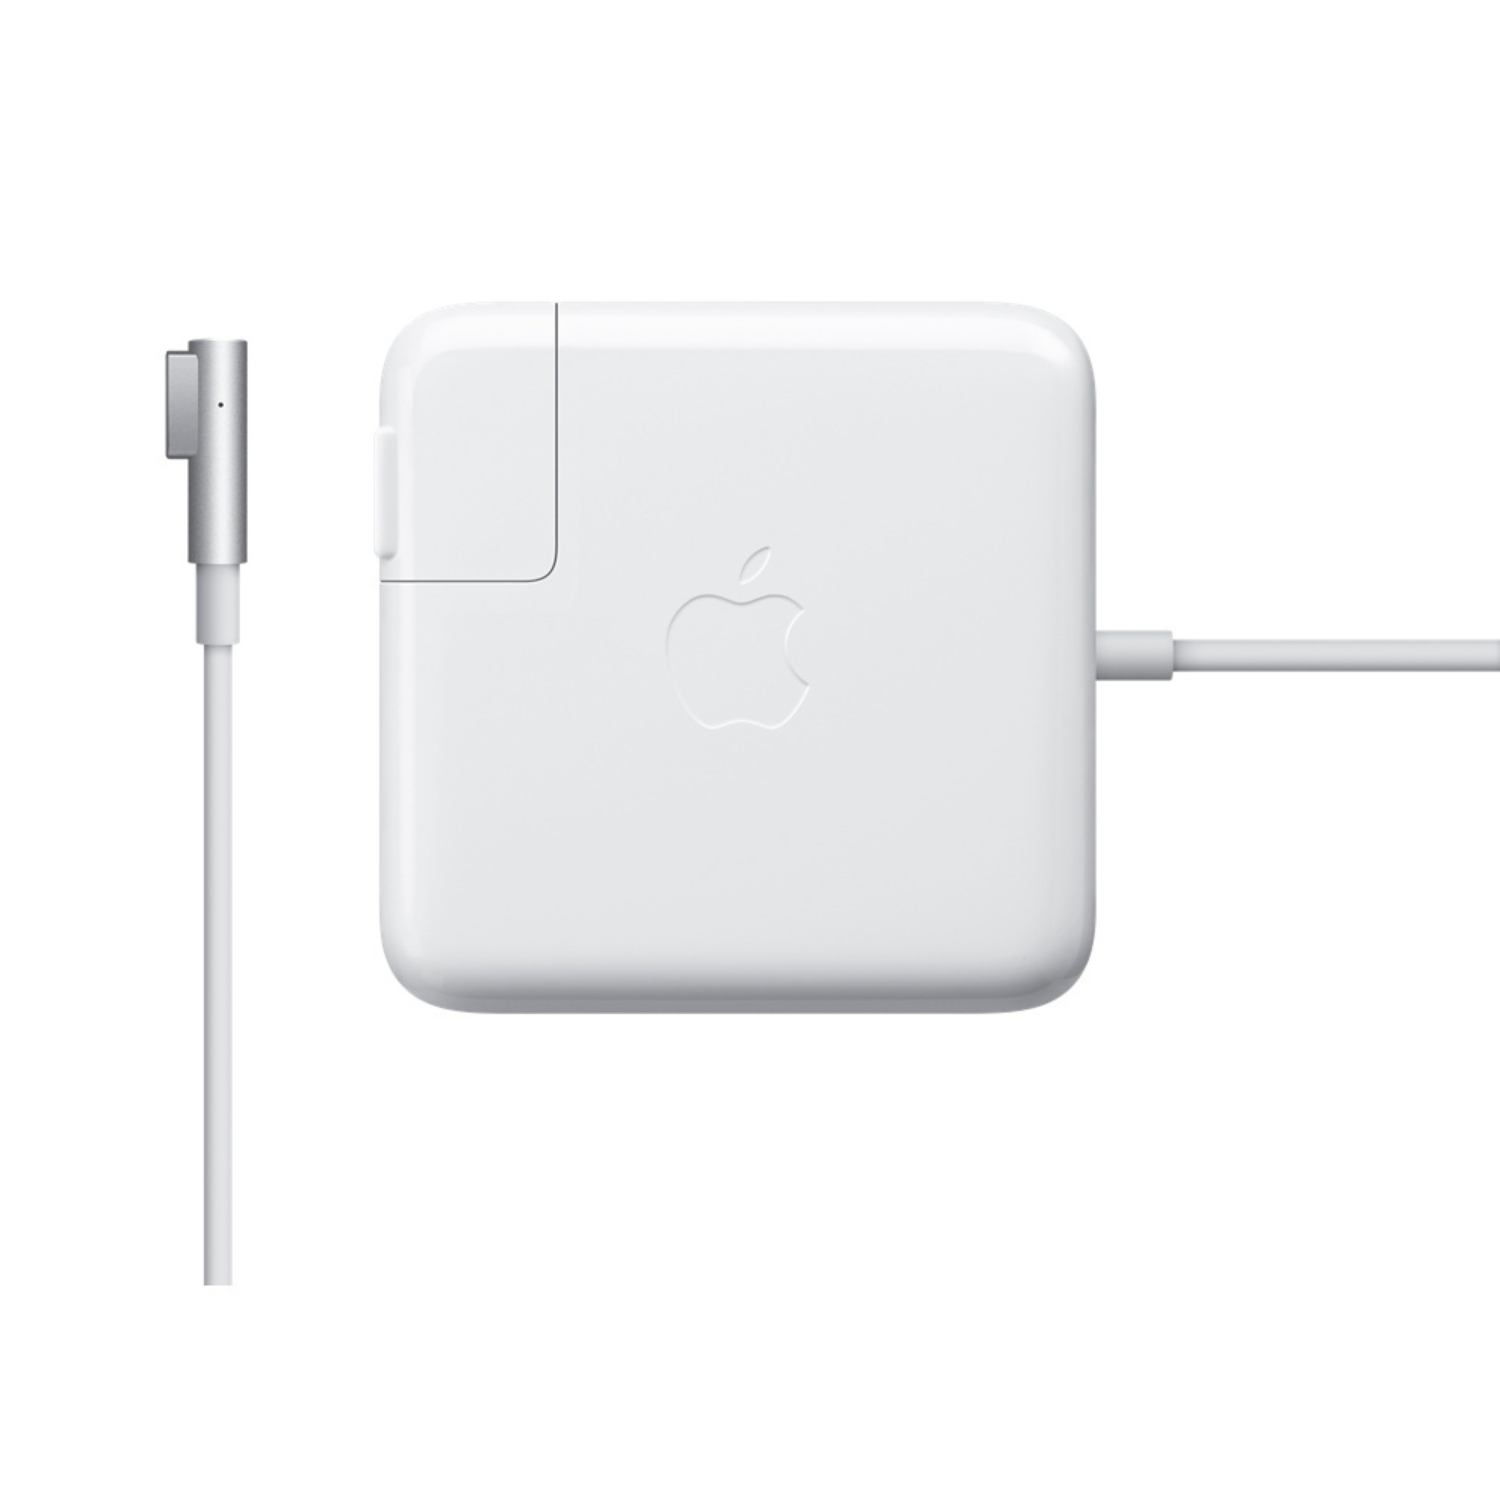 Macbook Charger - 45W Magsafe Power Adapter for MacBook Air 2008 - 2011